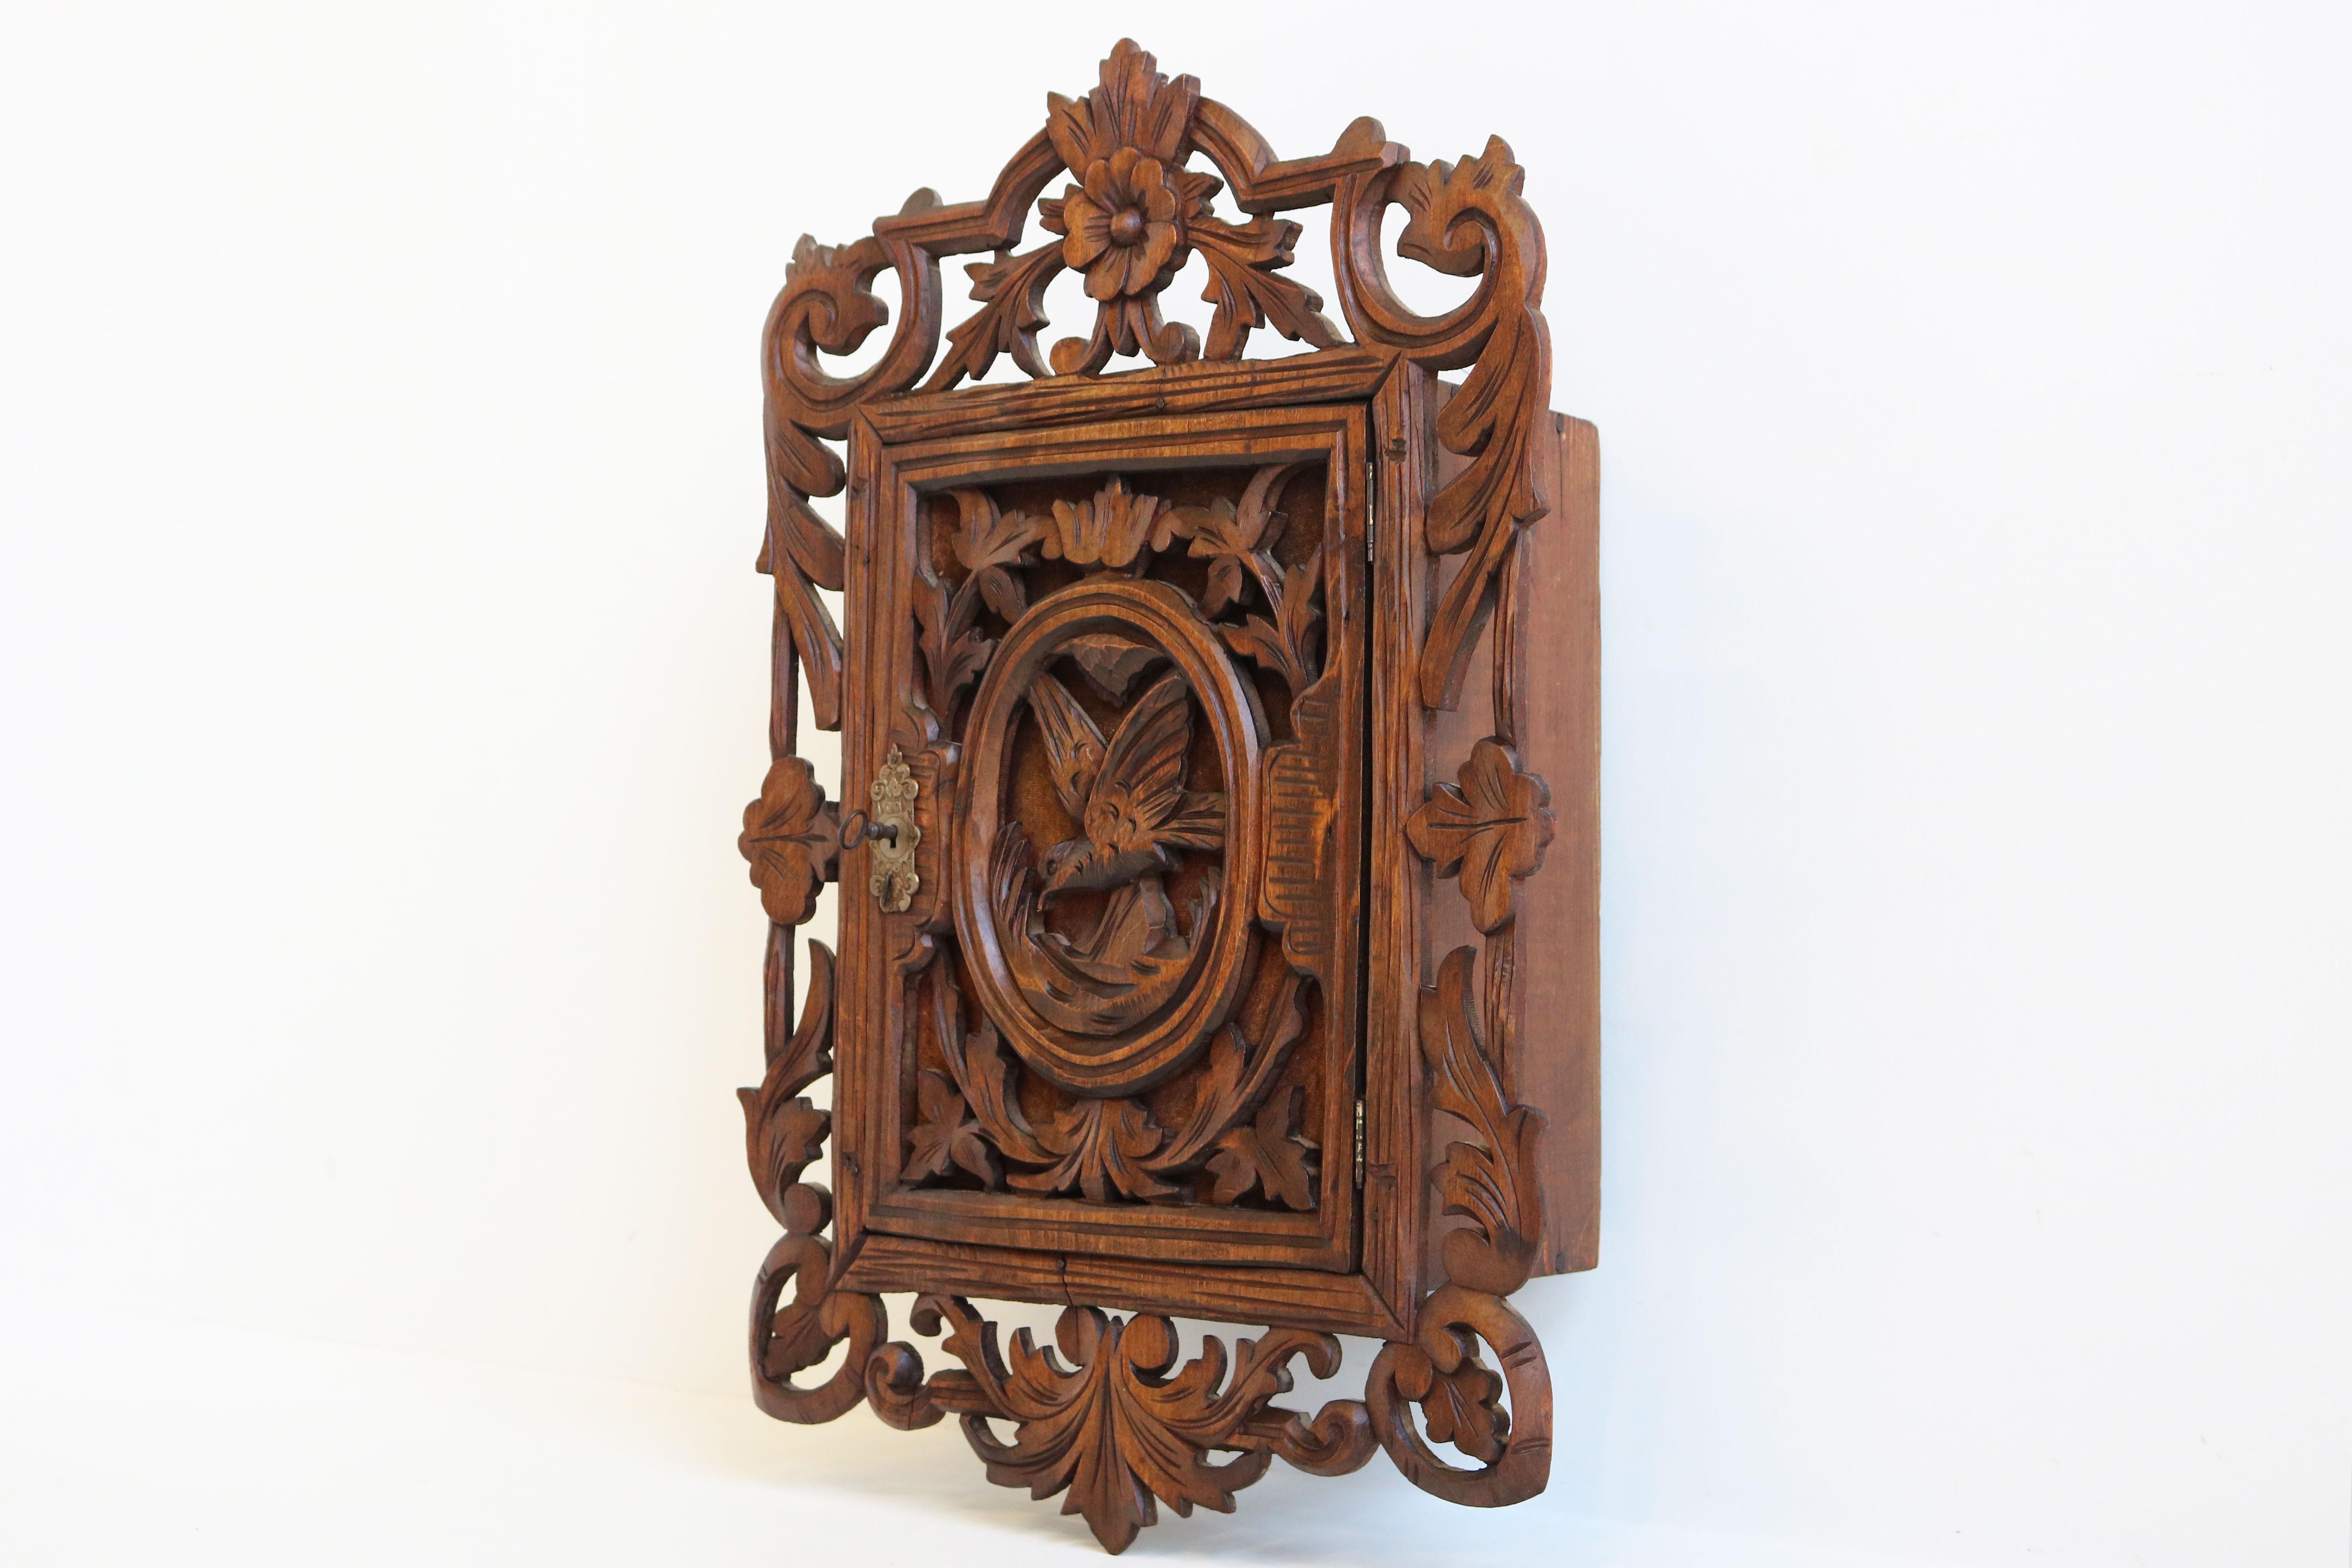 Lovely Swiss 19th century hand carved Black Forest wall cabinet. 
Fully hand carved with gorgeous details & bird in the center in the Black Forest style. 
Made out of solid wood, great quality & craftsmanship. 
Very decorative and practical small